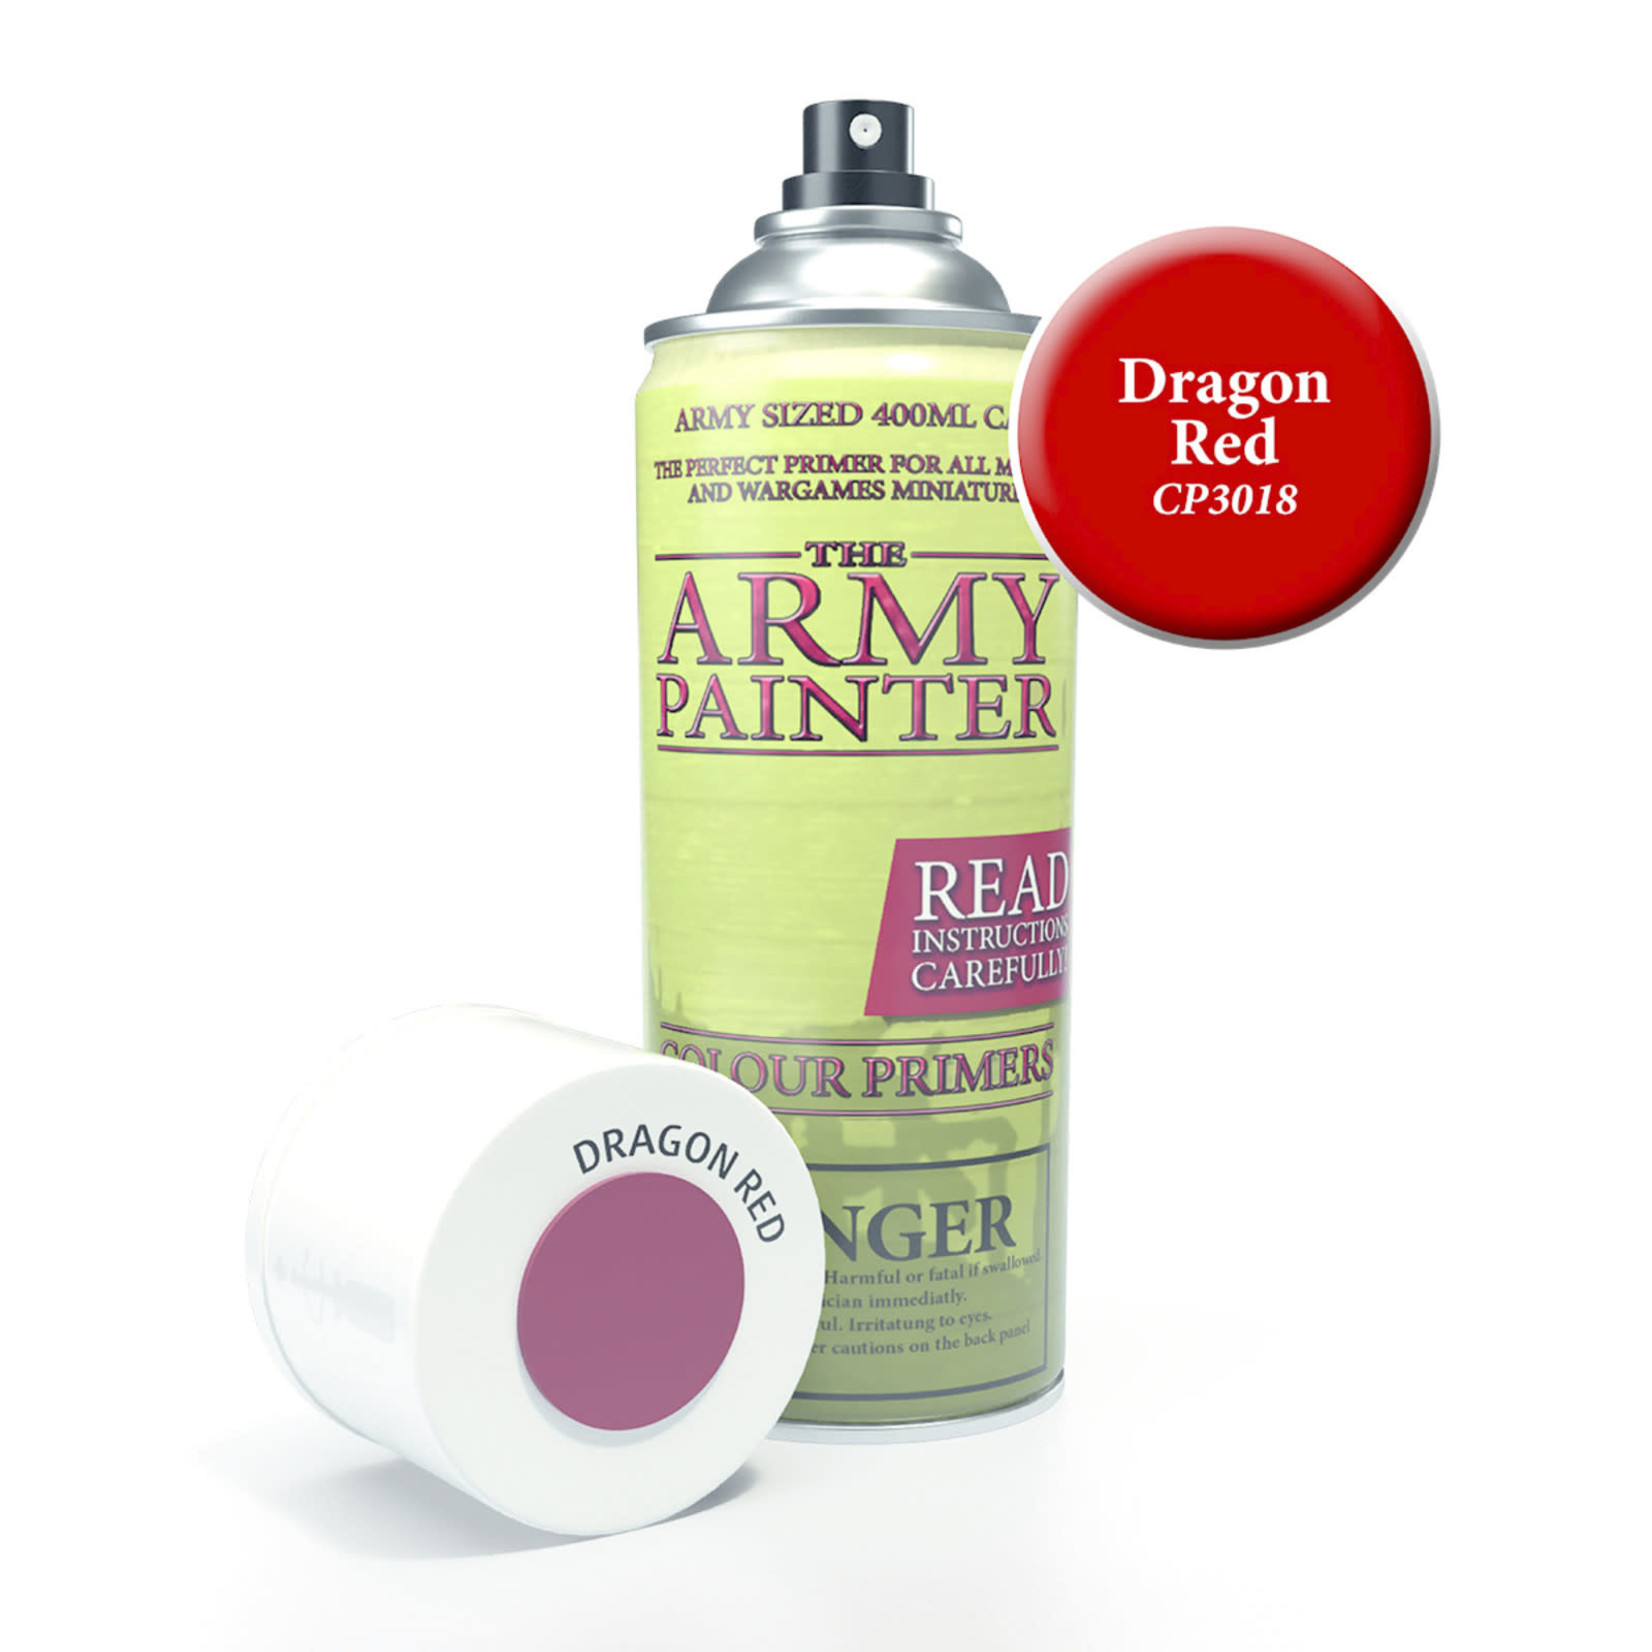 Army Painter Army Painter Colour Primer Spray Dragon Red